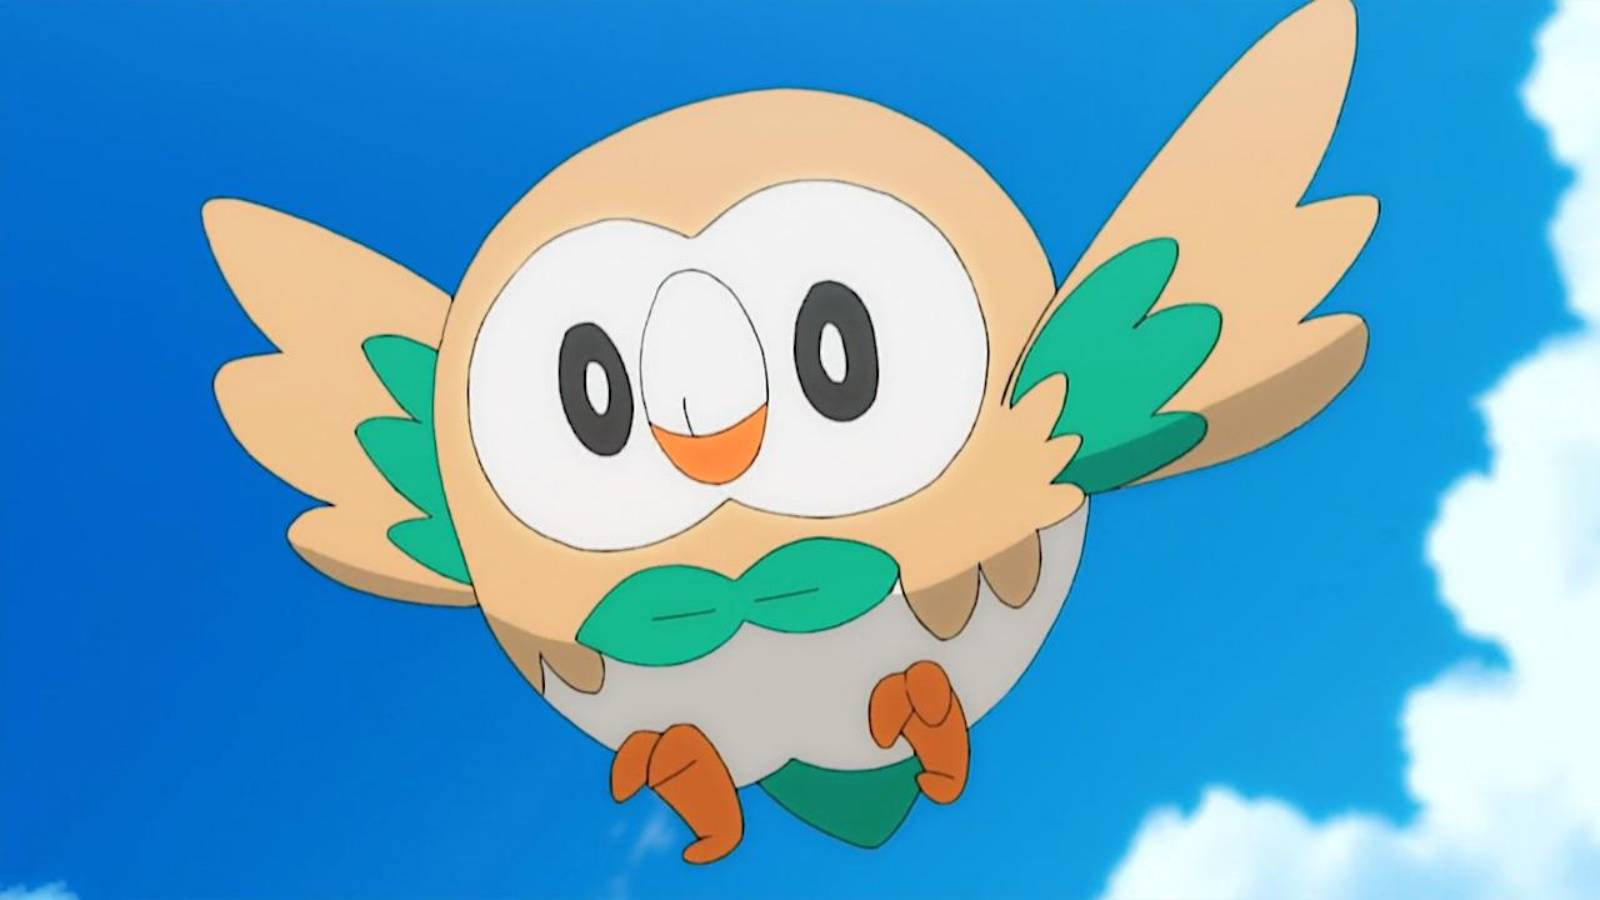 A still from the Pokemon anime shows Ash Ketchum's Rowlet